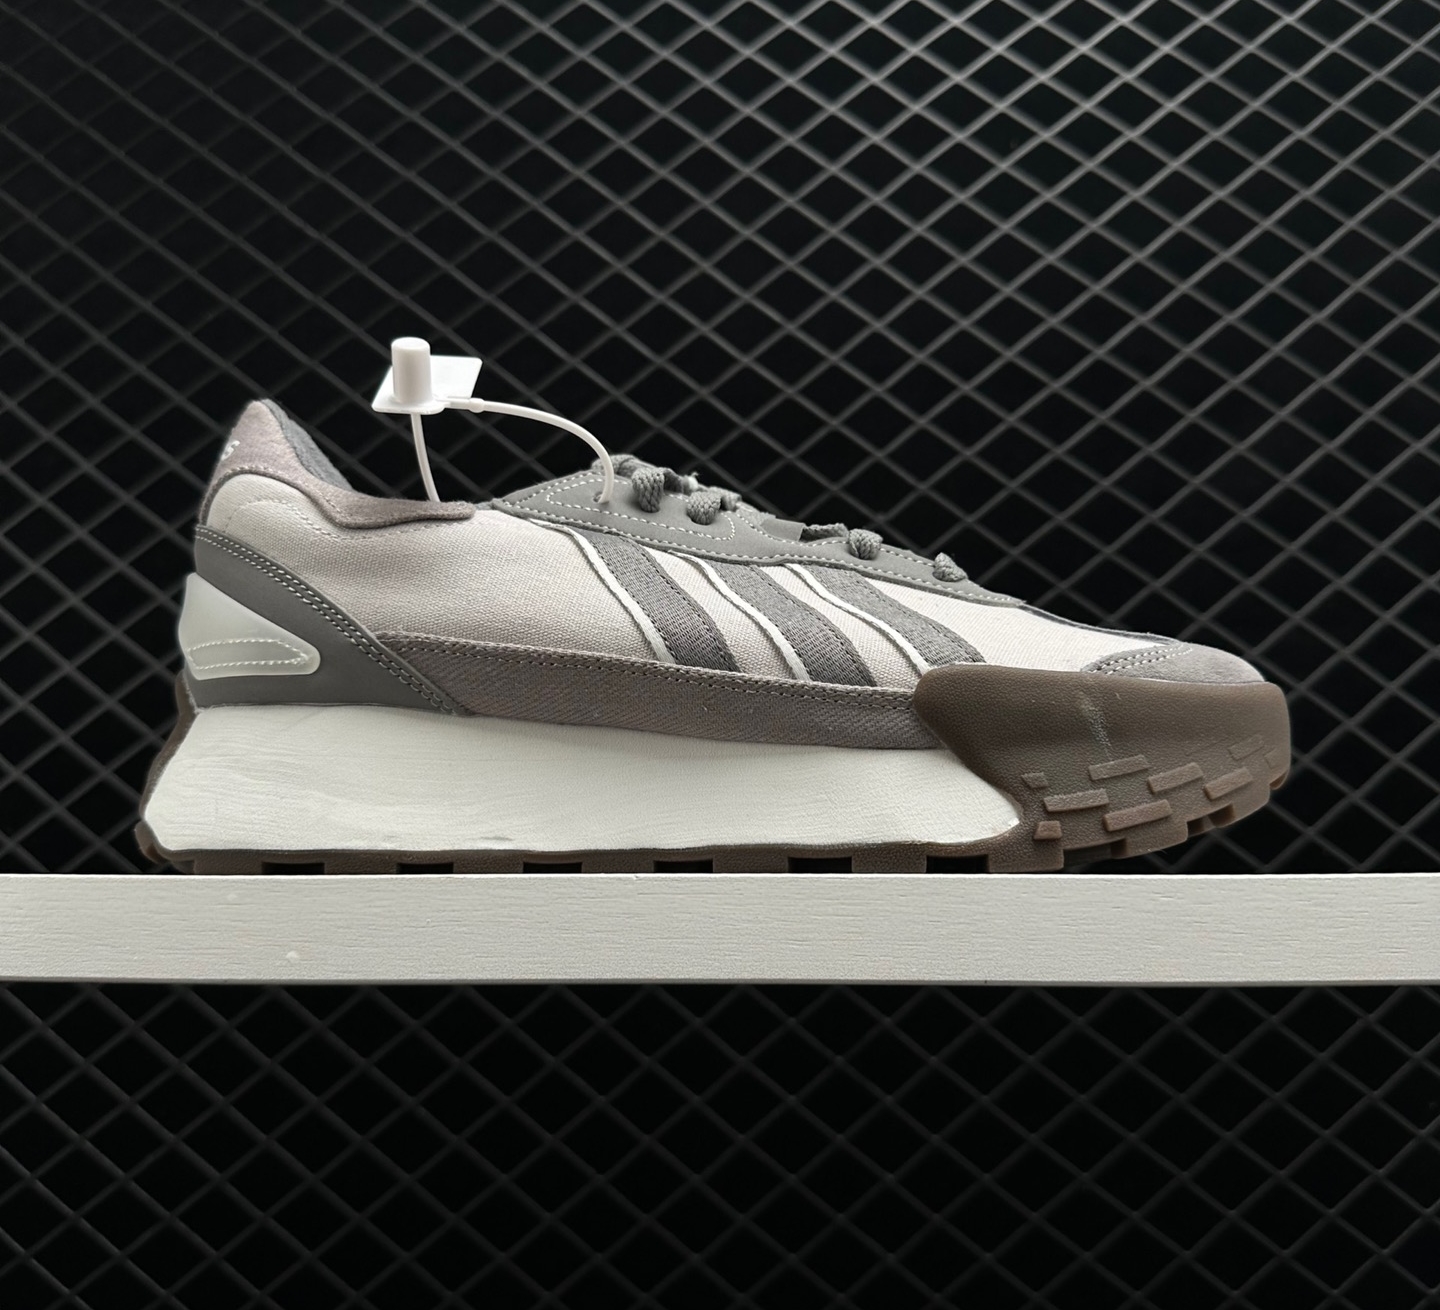 Adidas Neo Futro Gray: Stylish and Comfortable Sneakers for Men